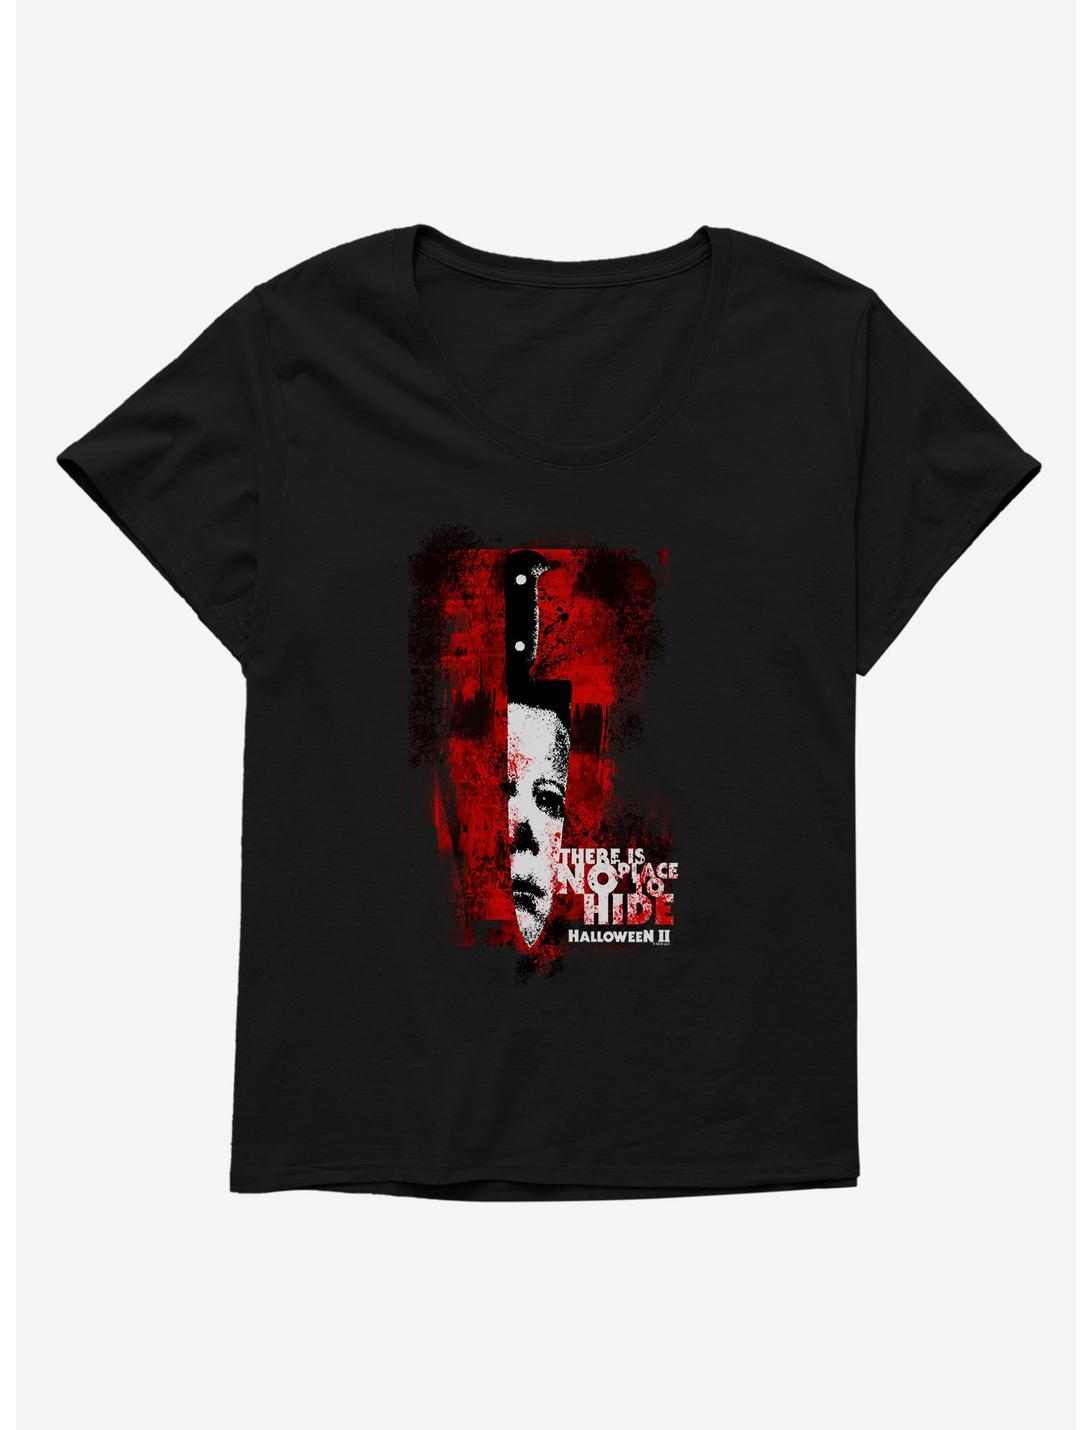 Halloween II There Is No Place To Hide Girls T-Shirt Plus Size, BLACK, hi-res